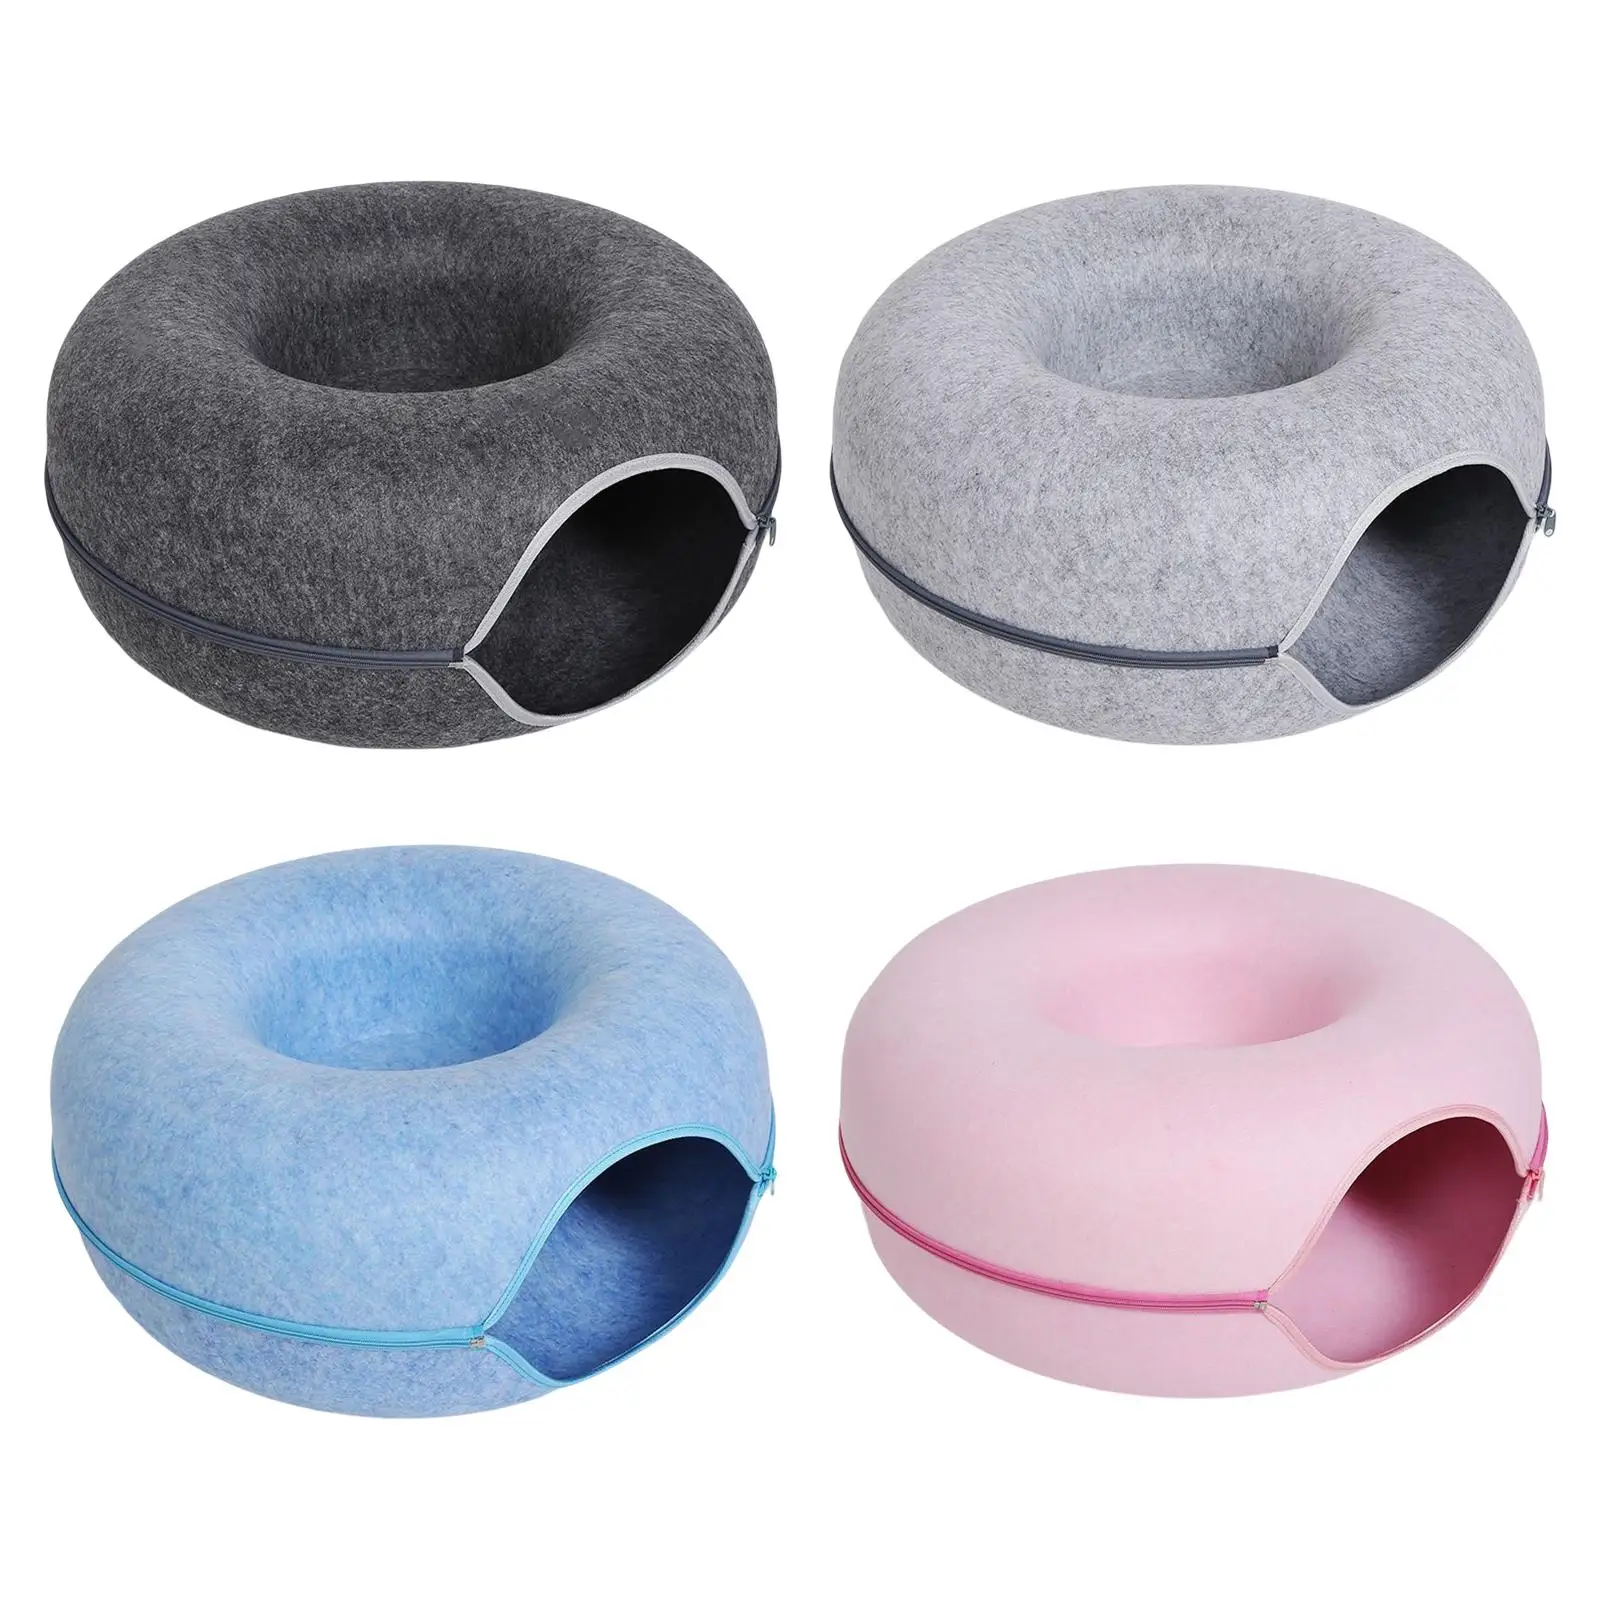 Felt Cave for Cat Removable Indoor Cats Washable Hideaway Cave Nest Tunnel